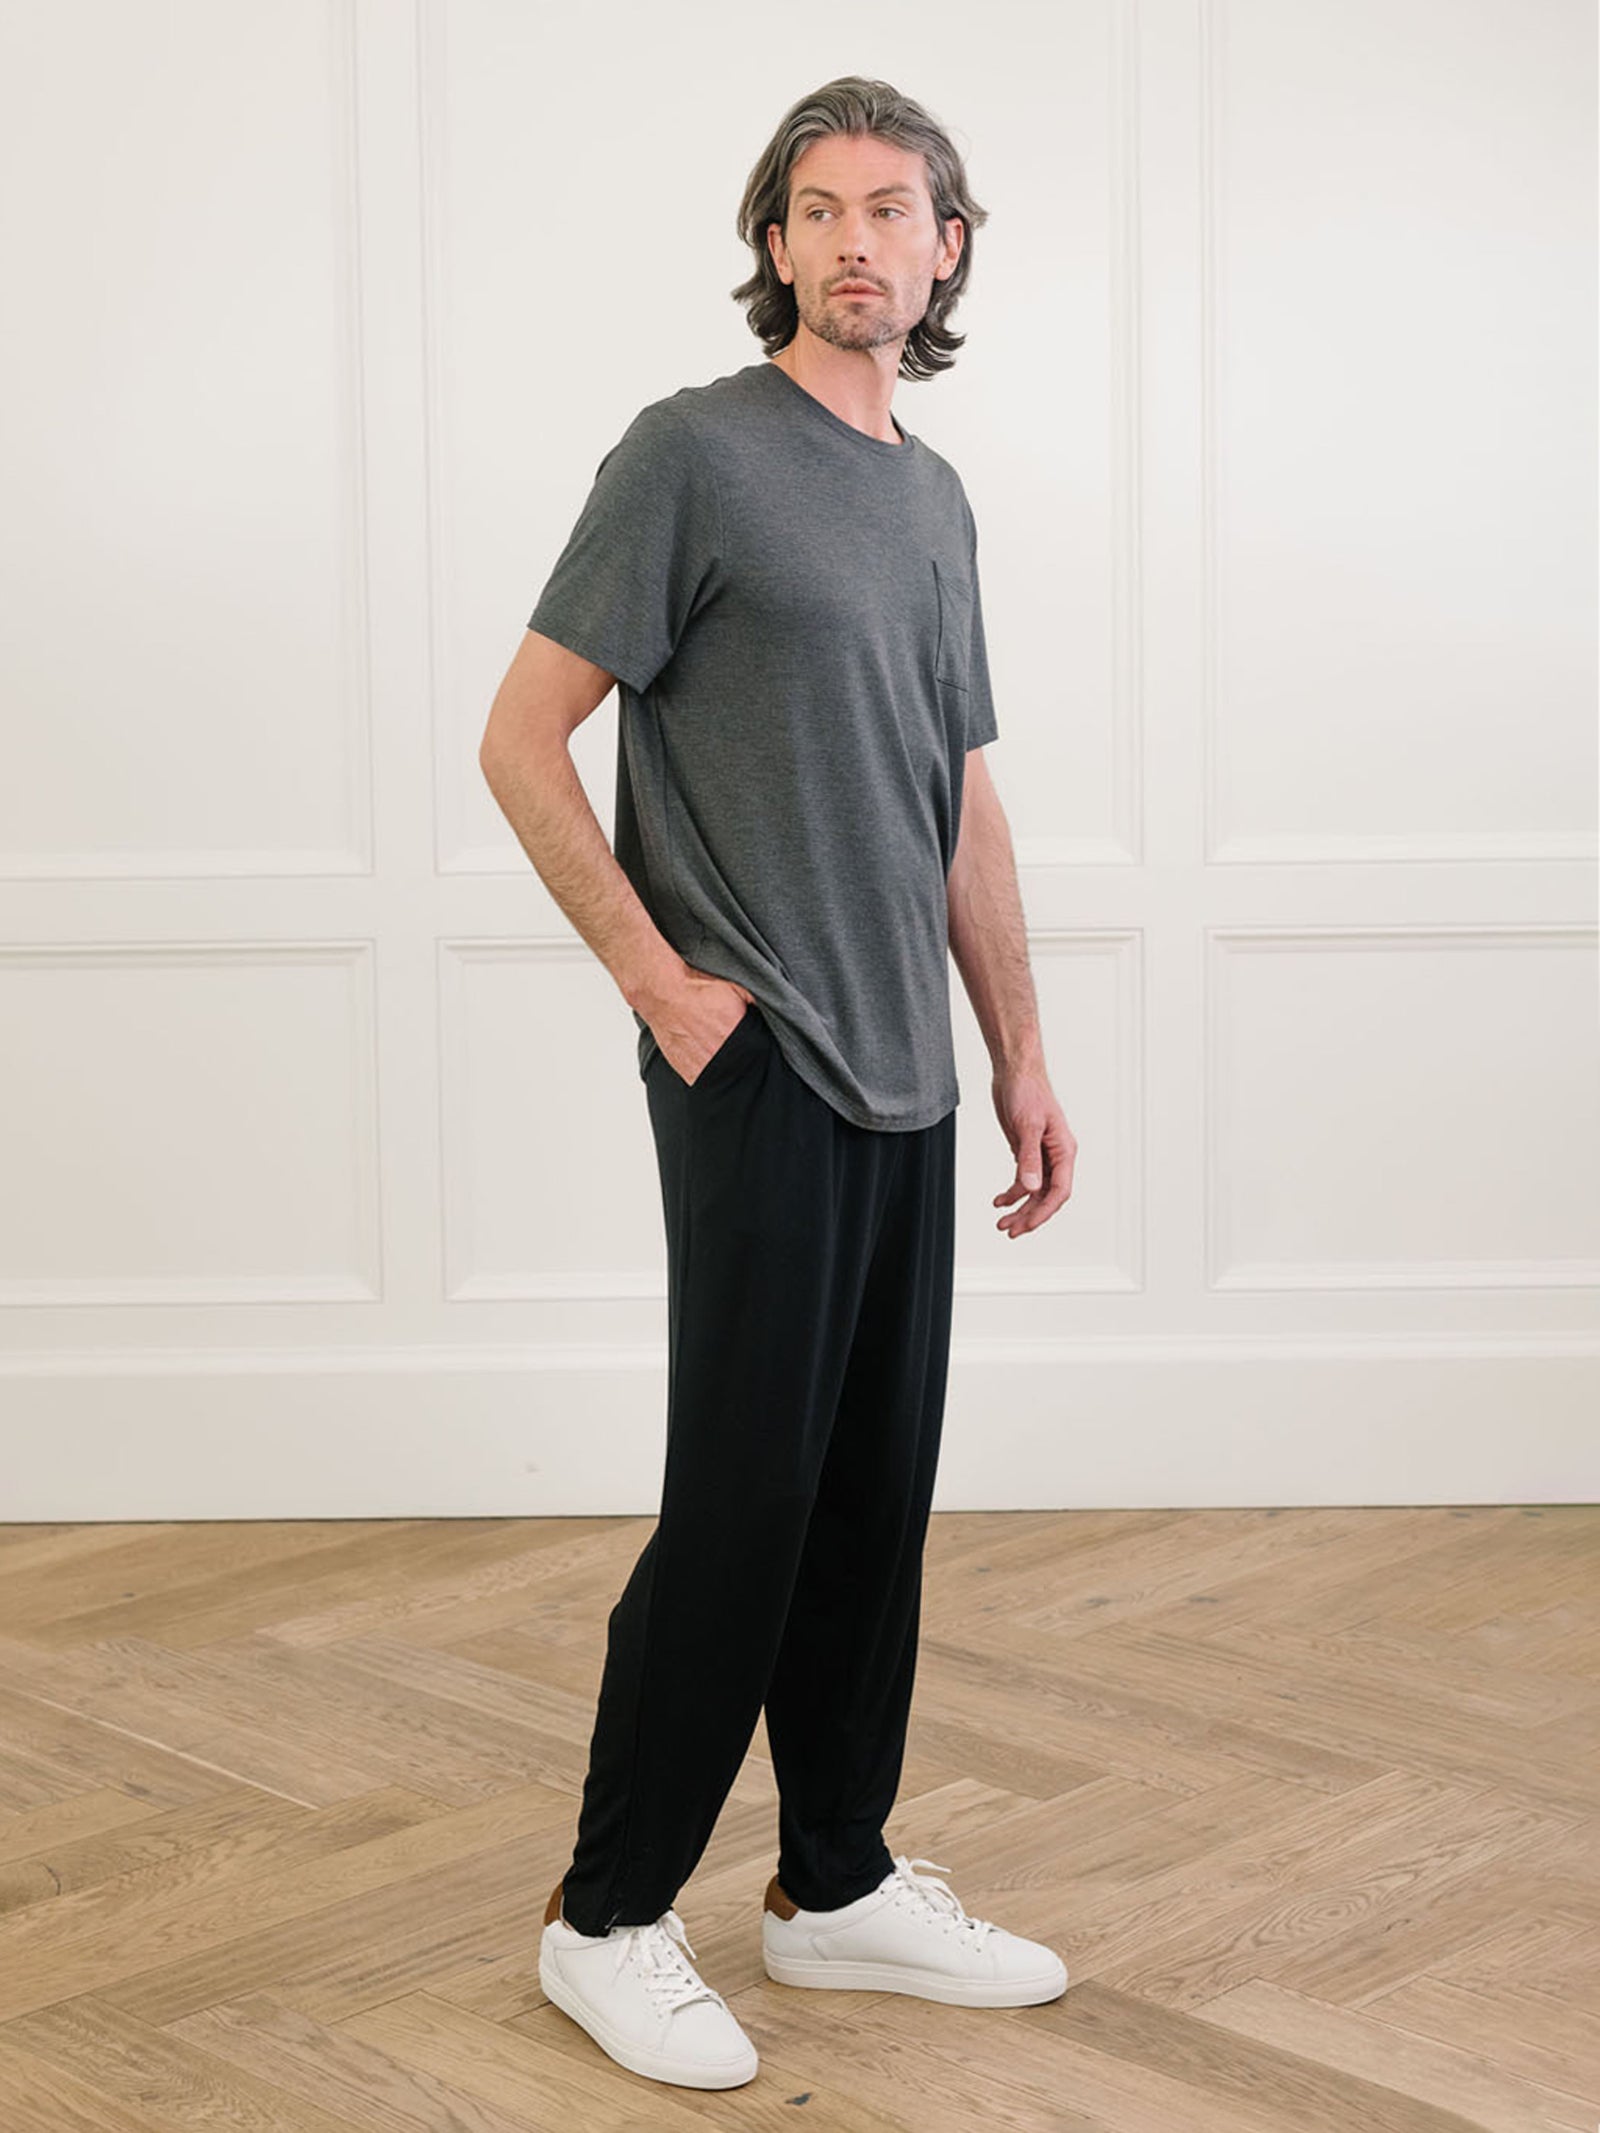 Charcoal Men's Stretch-Knit Bamboo Lounge Tee. A man is wearing the lounge tee in a well lit home.